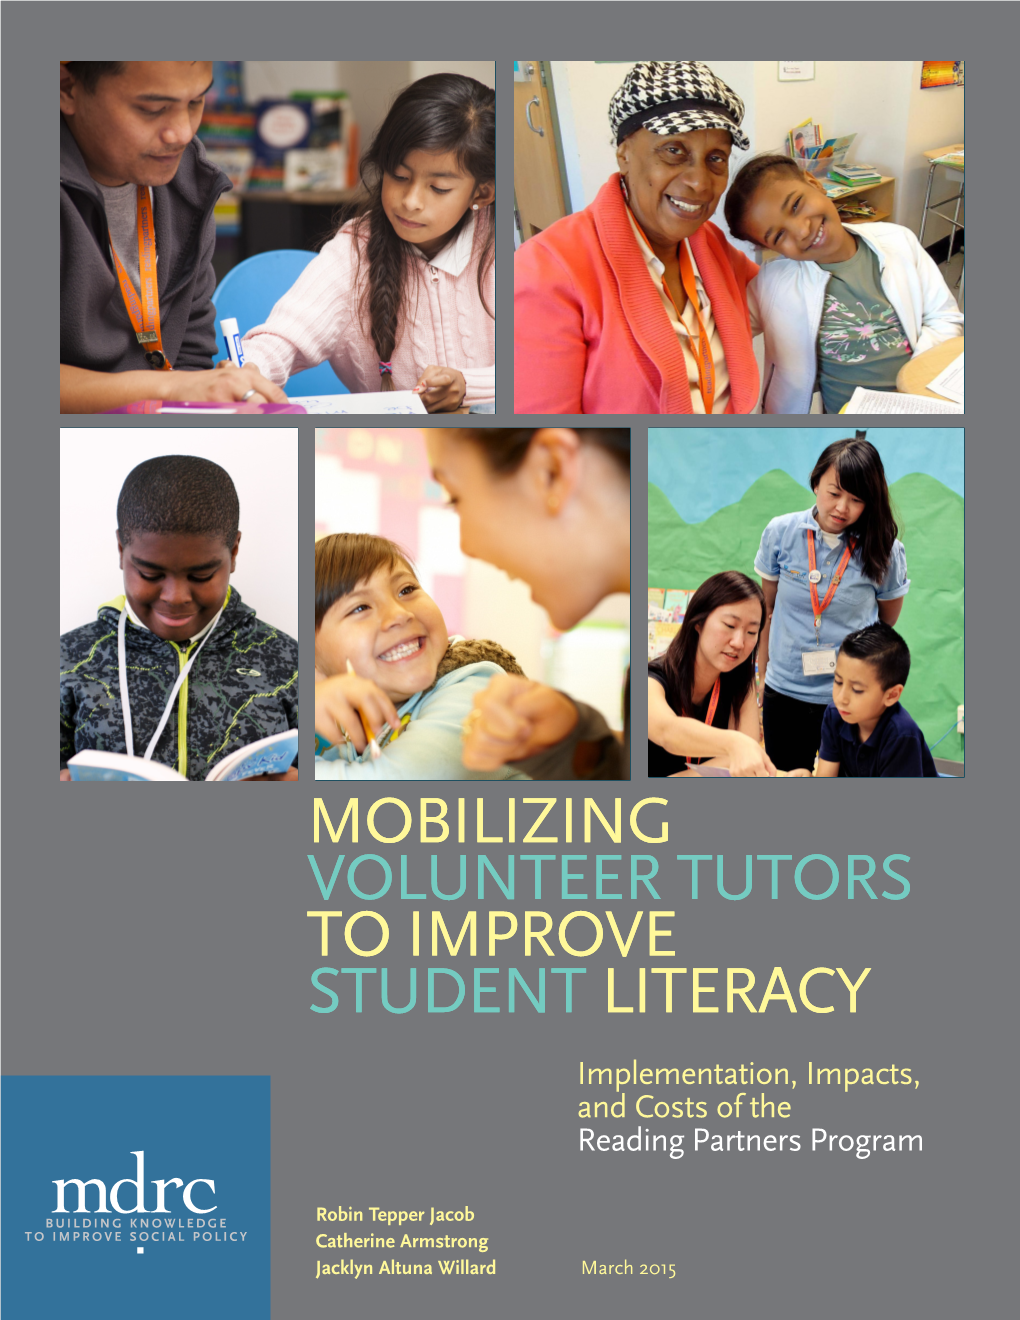 MOBILIZING VOLUNTEER TUTORS to IMPROVE STUDENT LITERACY Implementation, Impacts, and Costs of the Reading Partners Program